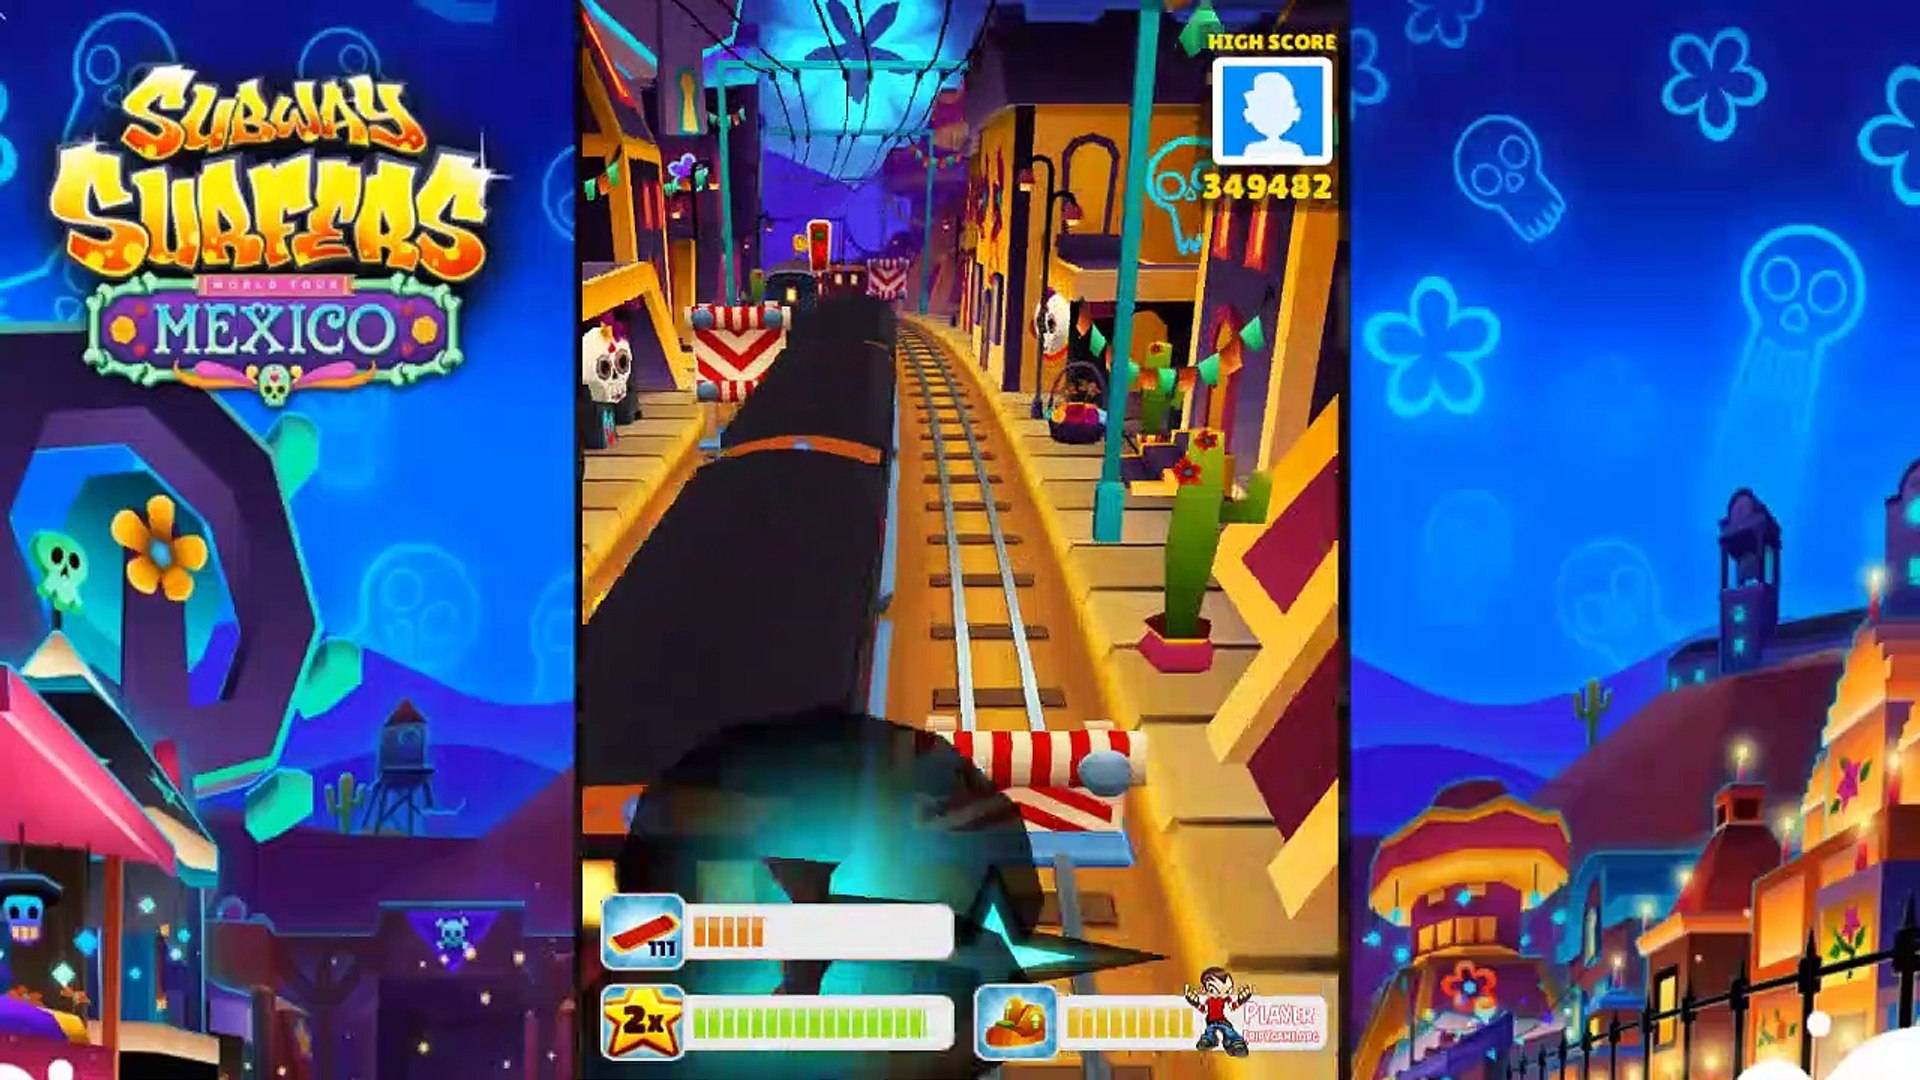 Subway Surfers - HAPPY #HALLOWEEN! 🎃 What's everyone dressing up